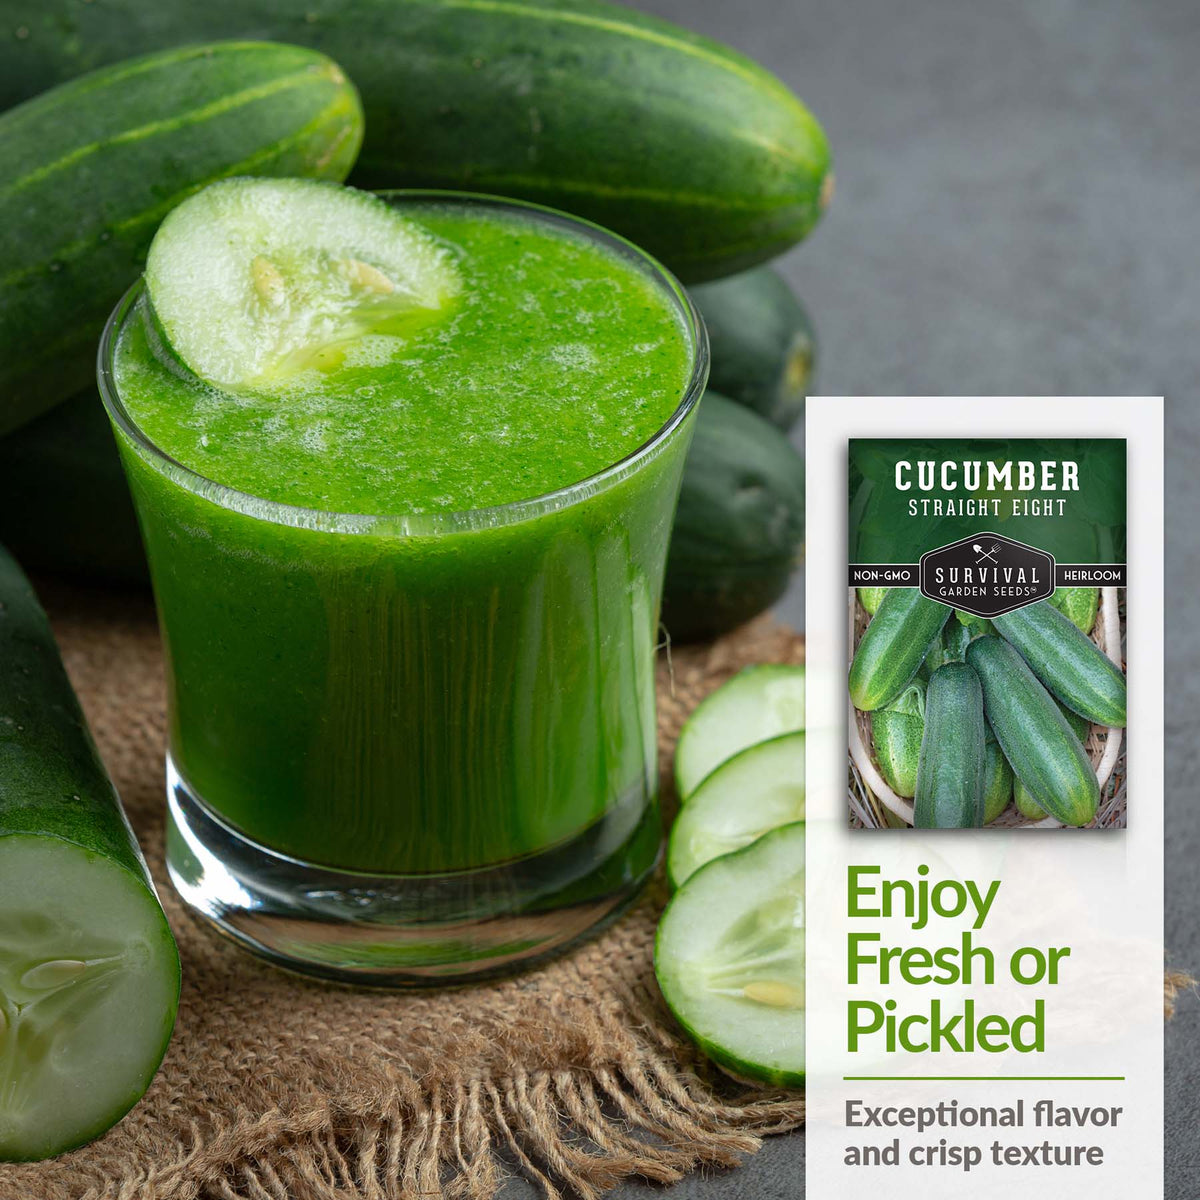 Enjoy Straight Eight Cucumbers fresh or pickled